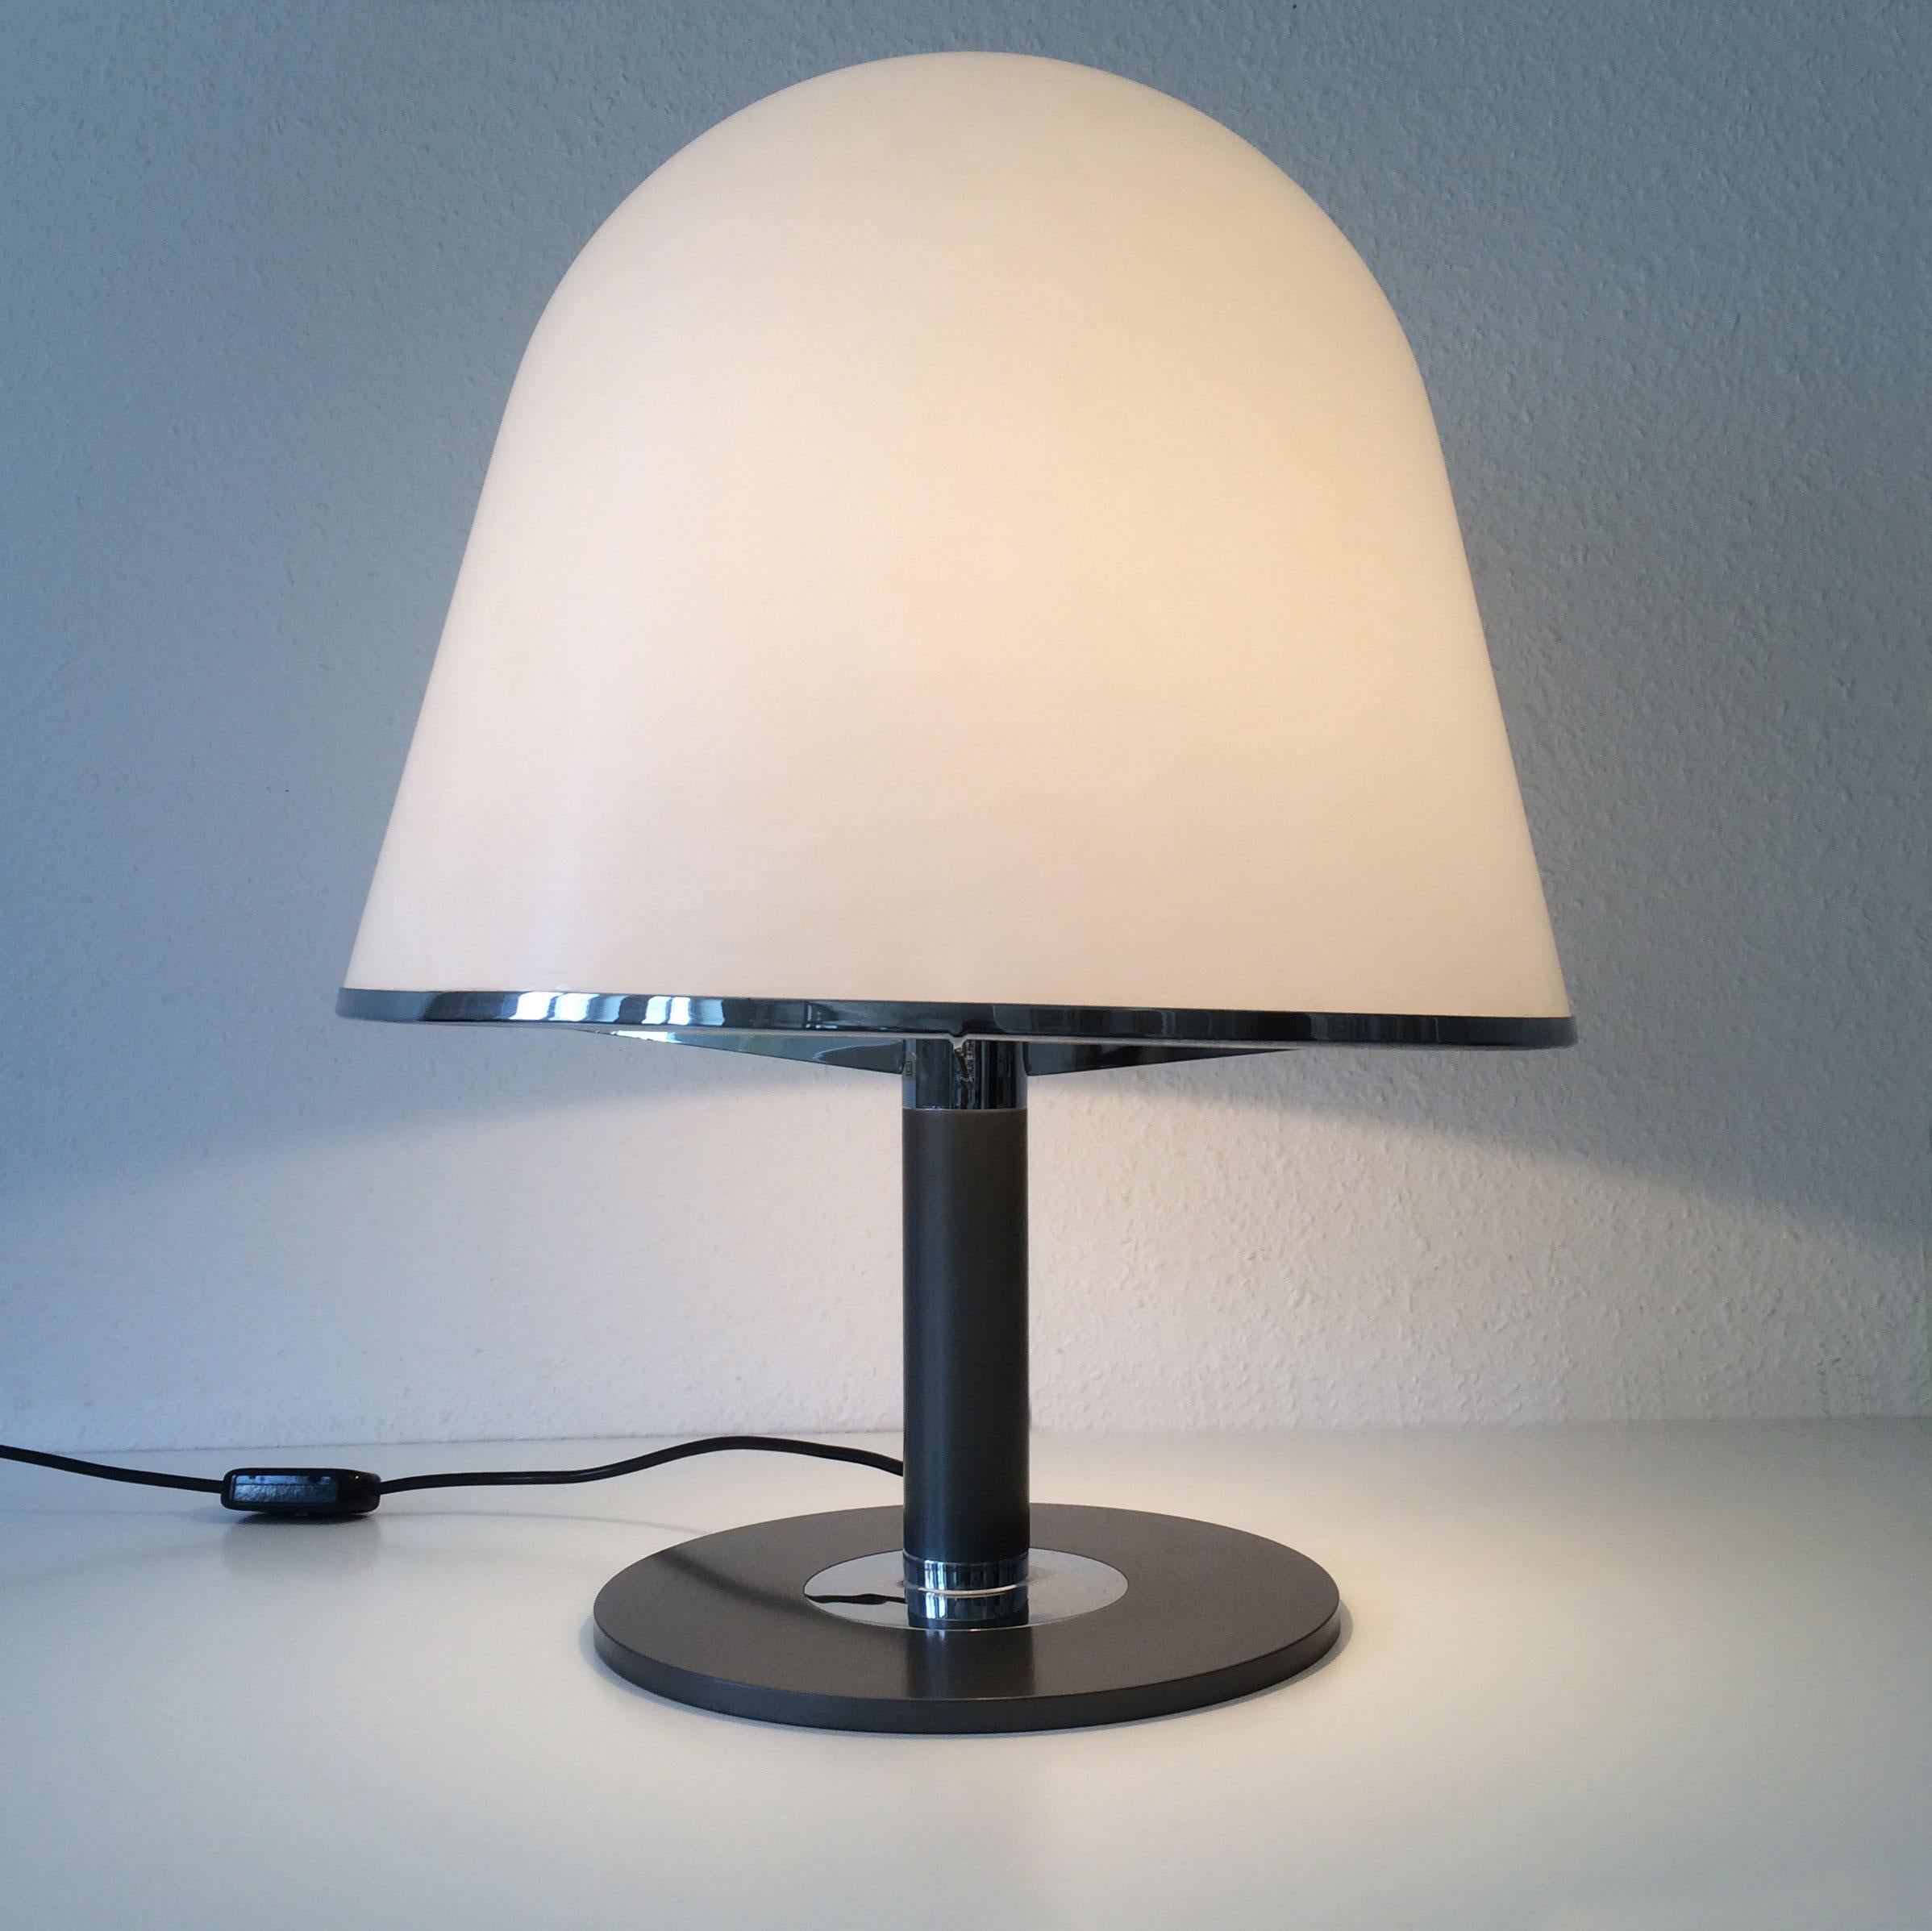 Rare and lovely Mid-Century Modern Kuala table lamp. Designed by Franco Bresciani, 1976. Manufactured by iGuzzini, Italy, 1970s.

This elegant table lamp is executed in metal and plexiglass and with 1 x E27 screw fit socket. 
It is with original